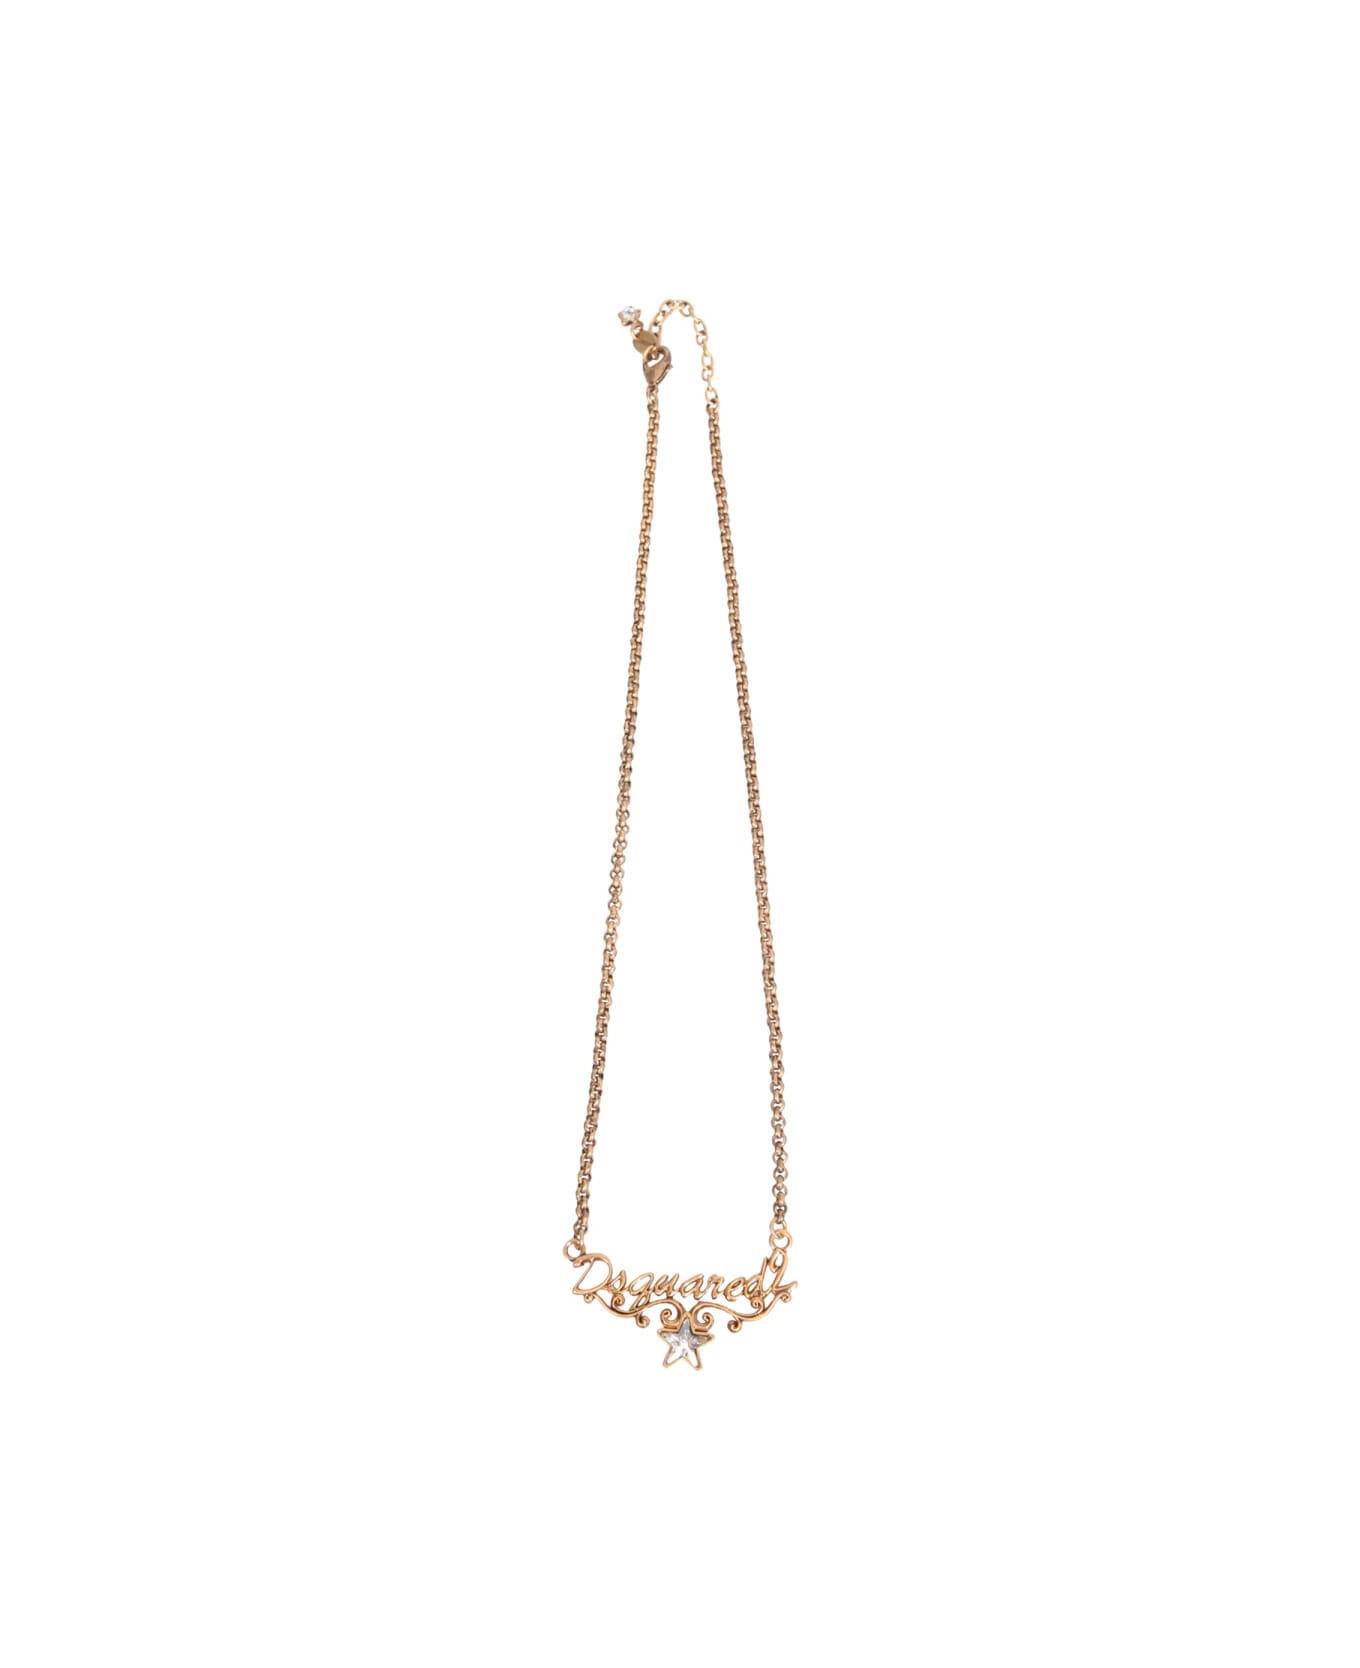 Dsquared2 Twinkle Necklace - GOLD ネックレス